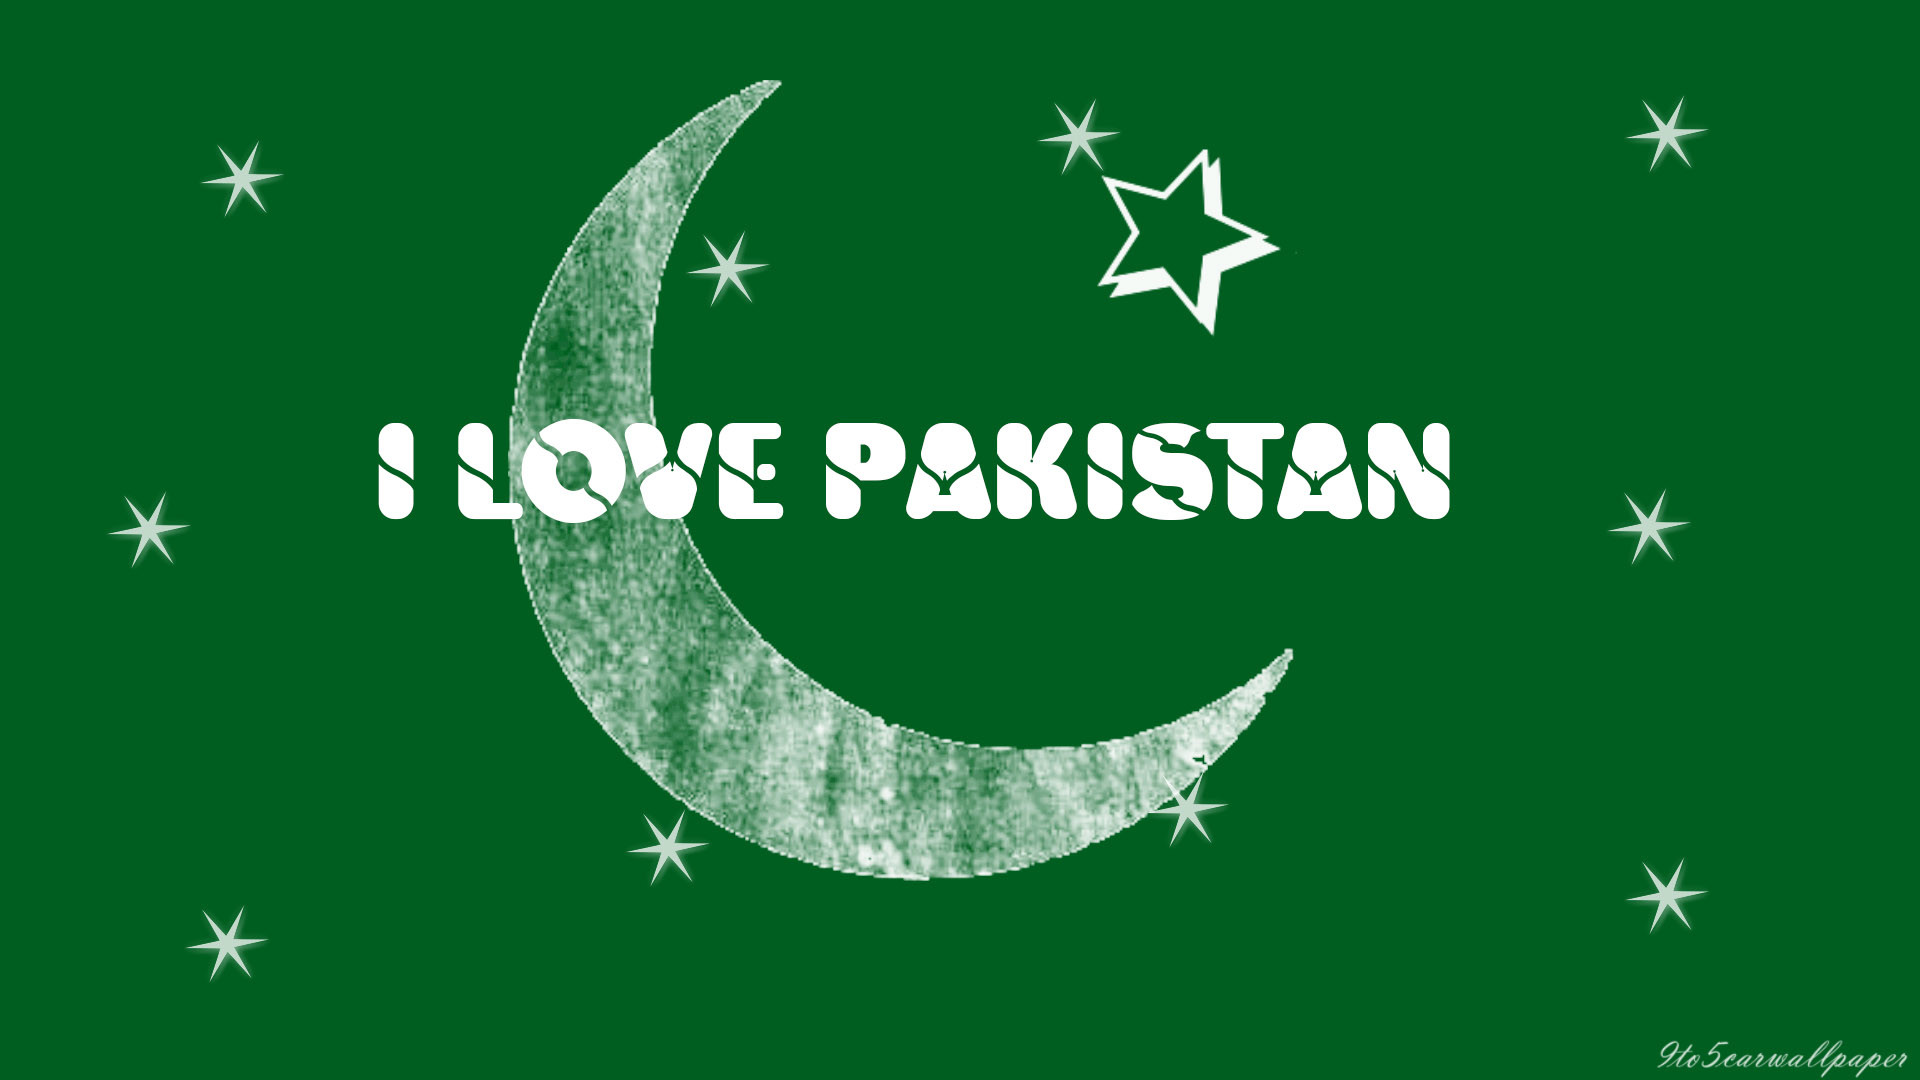 I Love Pakistan Hd Wallpapers Images 2017 Independence - Pakistan Independence Day 2017 - HD Wallpaper 